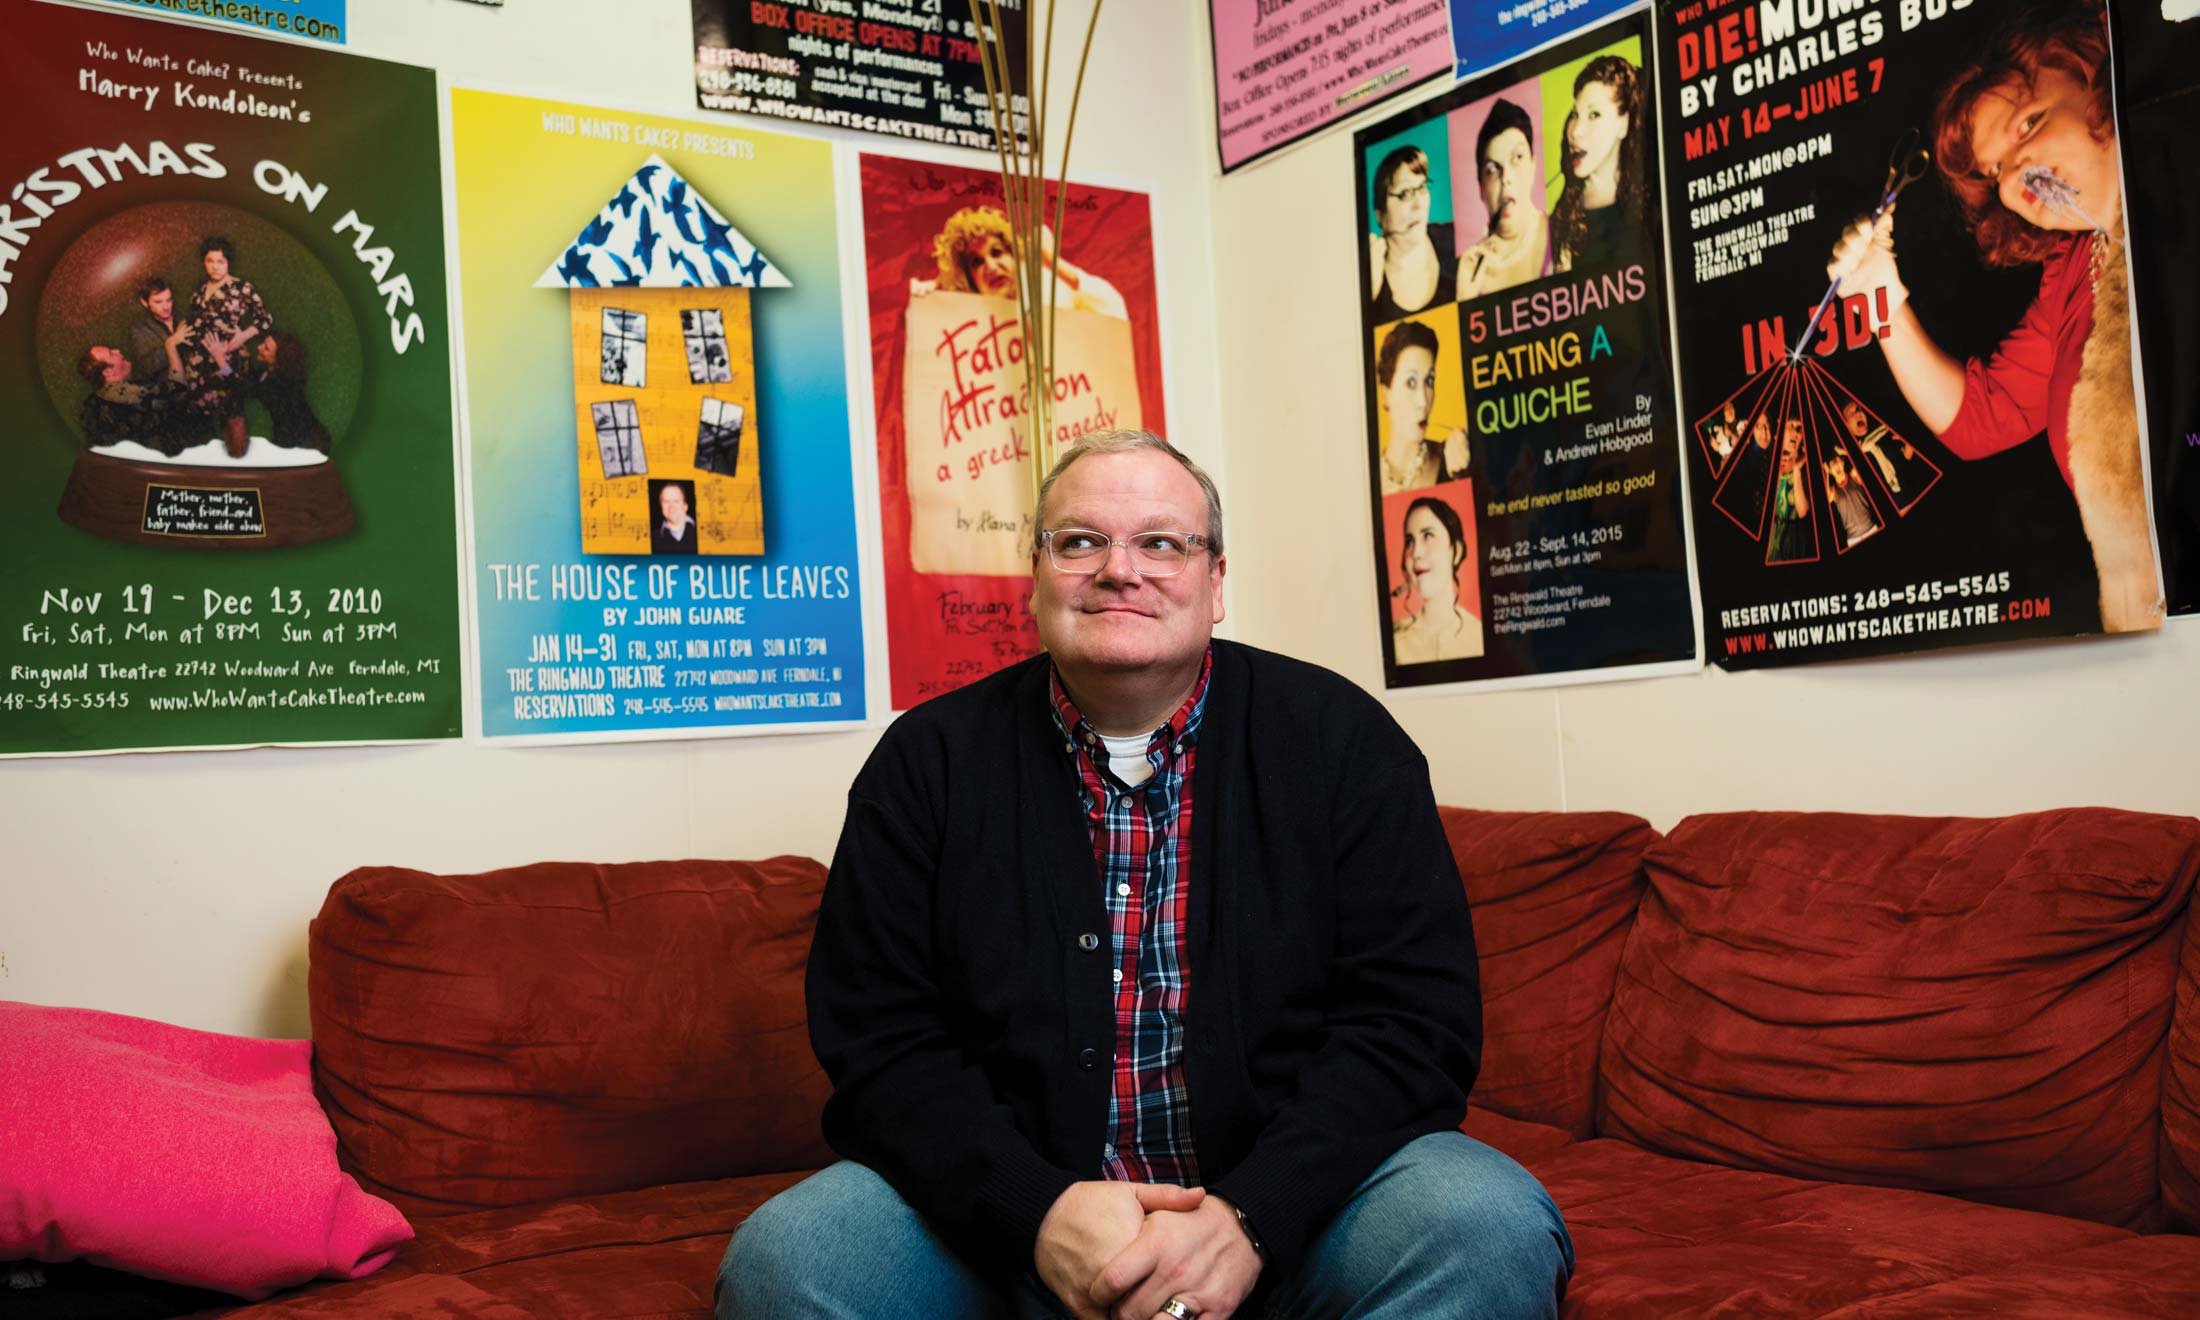 Backstage at The Ringwald Theatre in Ferndale, Michigan, Joe Bailey sits on a red couch in his office. Many posters from his shows line the walls. Wearing a black jacket, jeans and a flannel shirt.